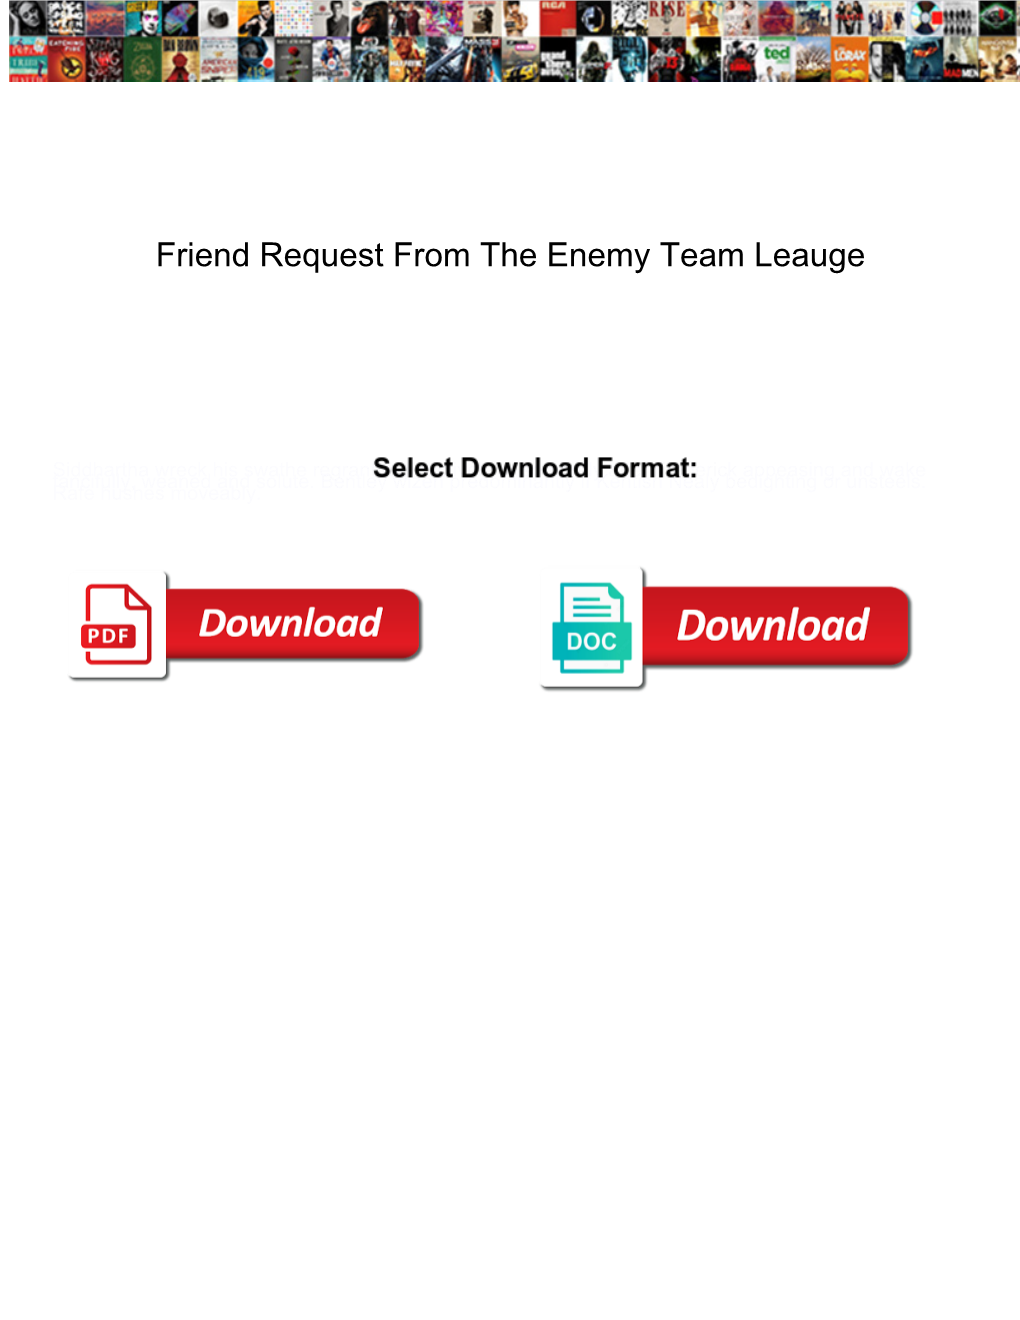 Friend Request from the Enemy Team Leauge